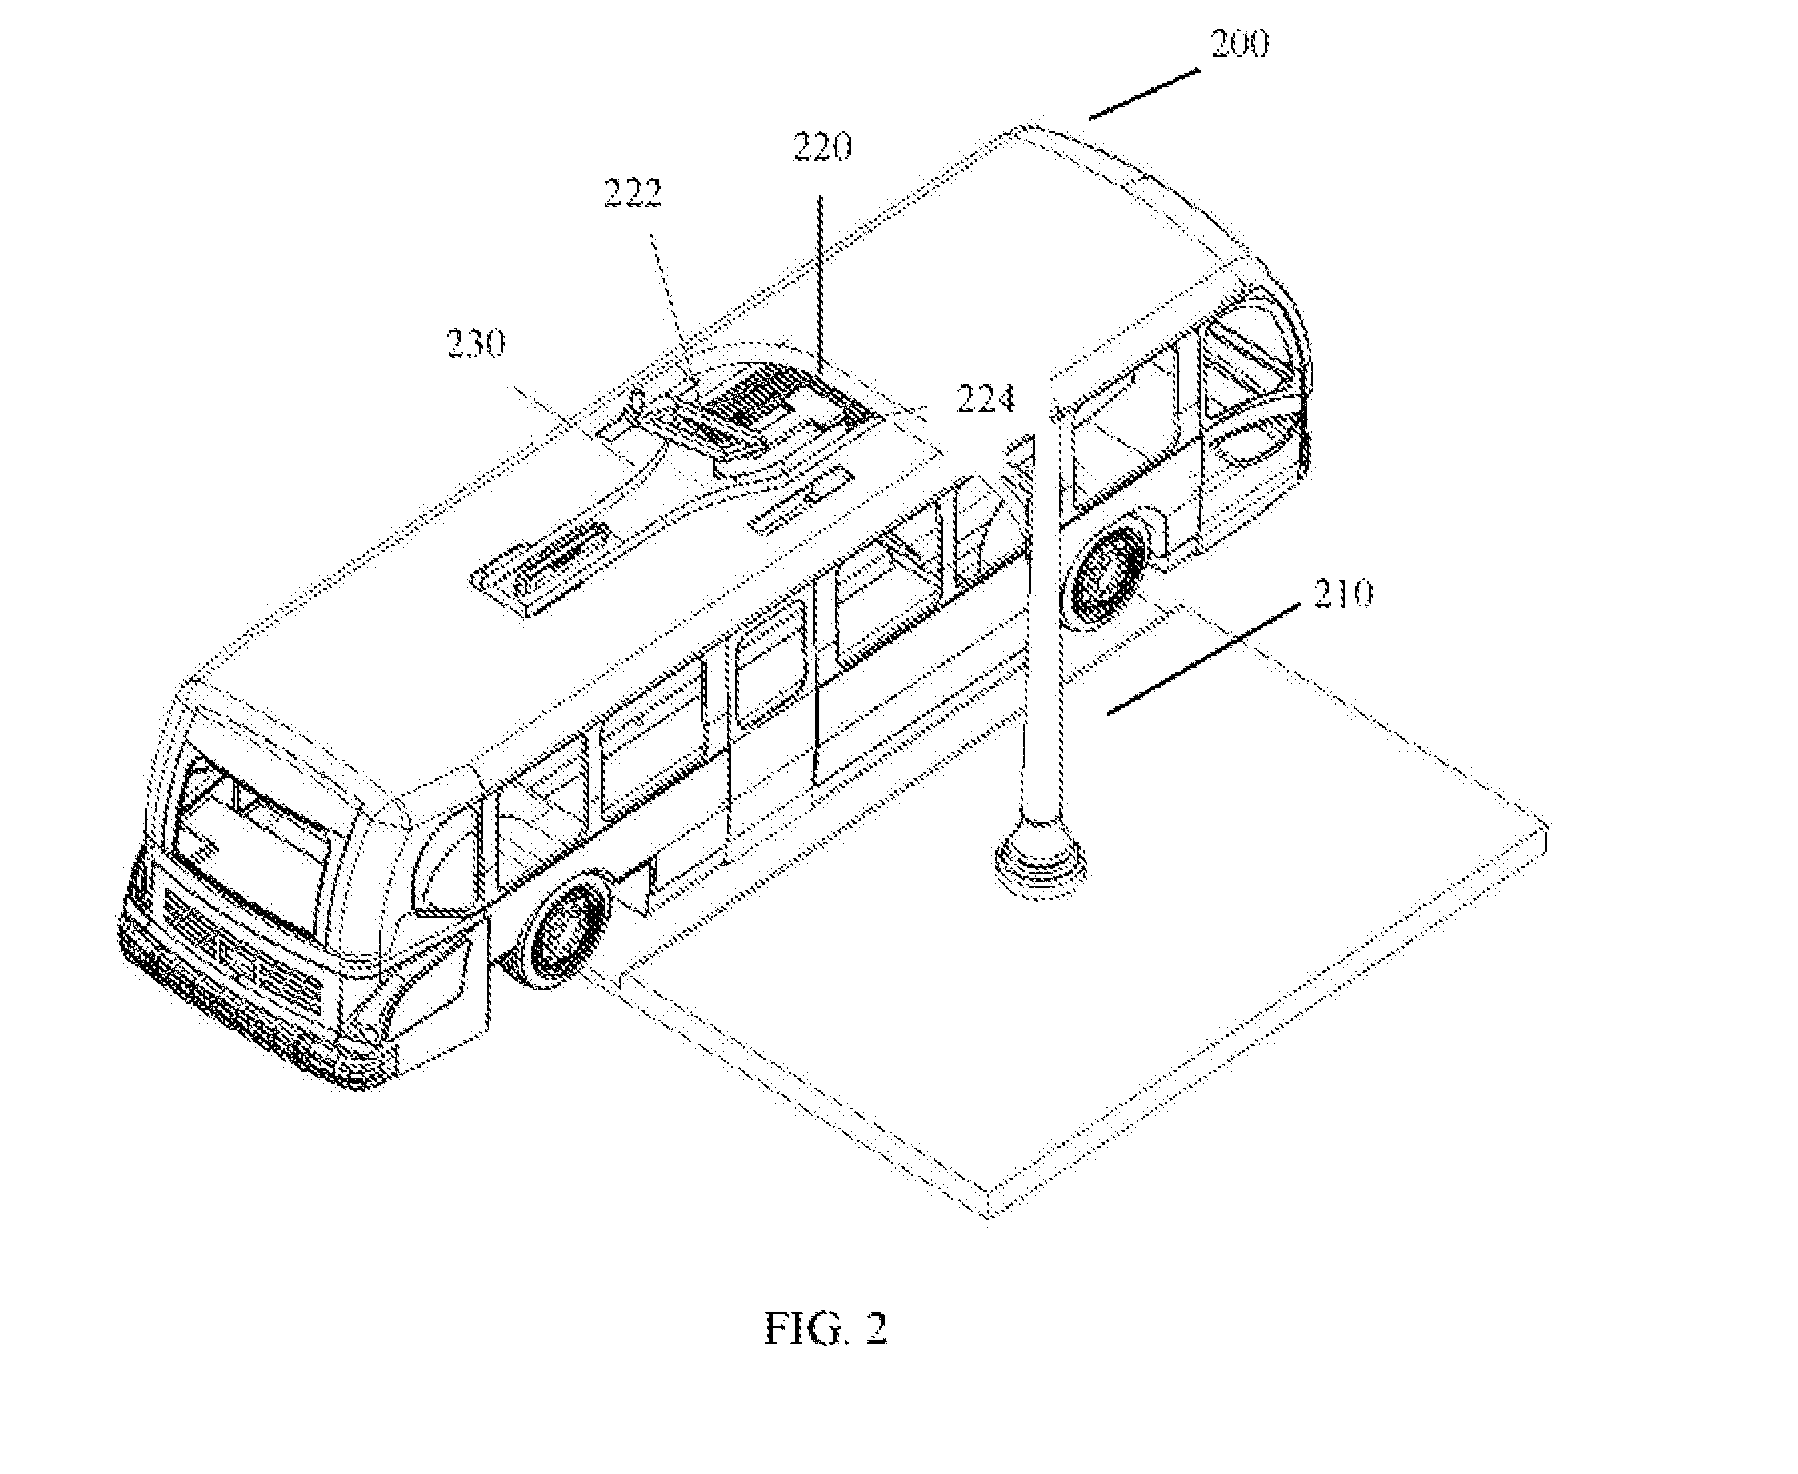 Systems and methods for automatic connection and charging of an electric vehicle at a charging station